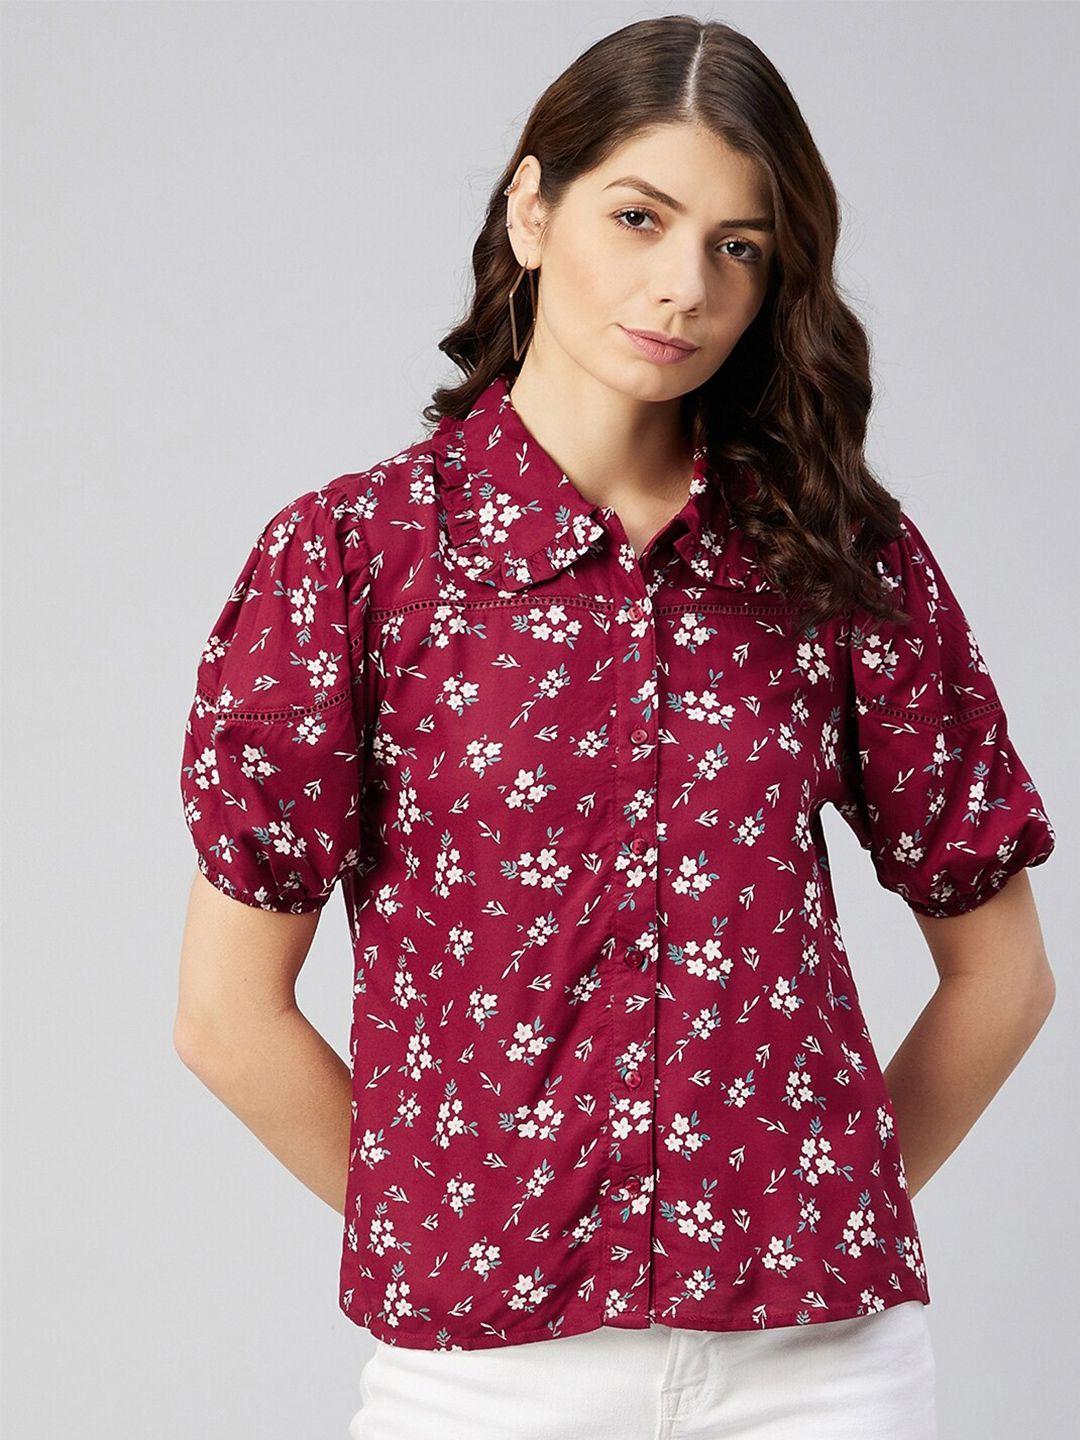 rare-women-maroon-&-white-floral-printed-puff-sleeves-casual-shirt